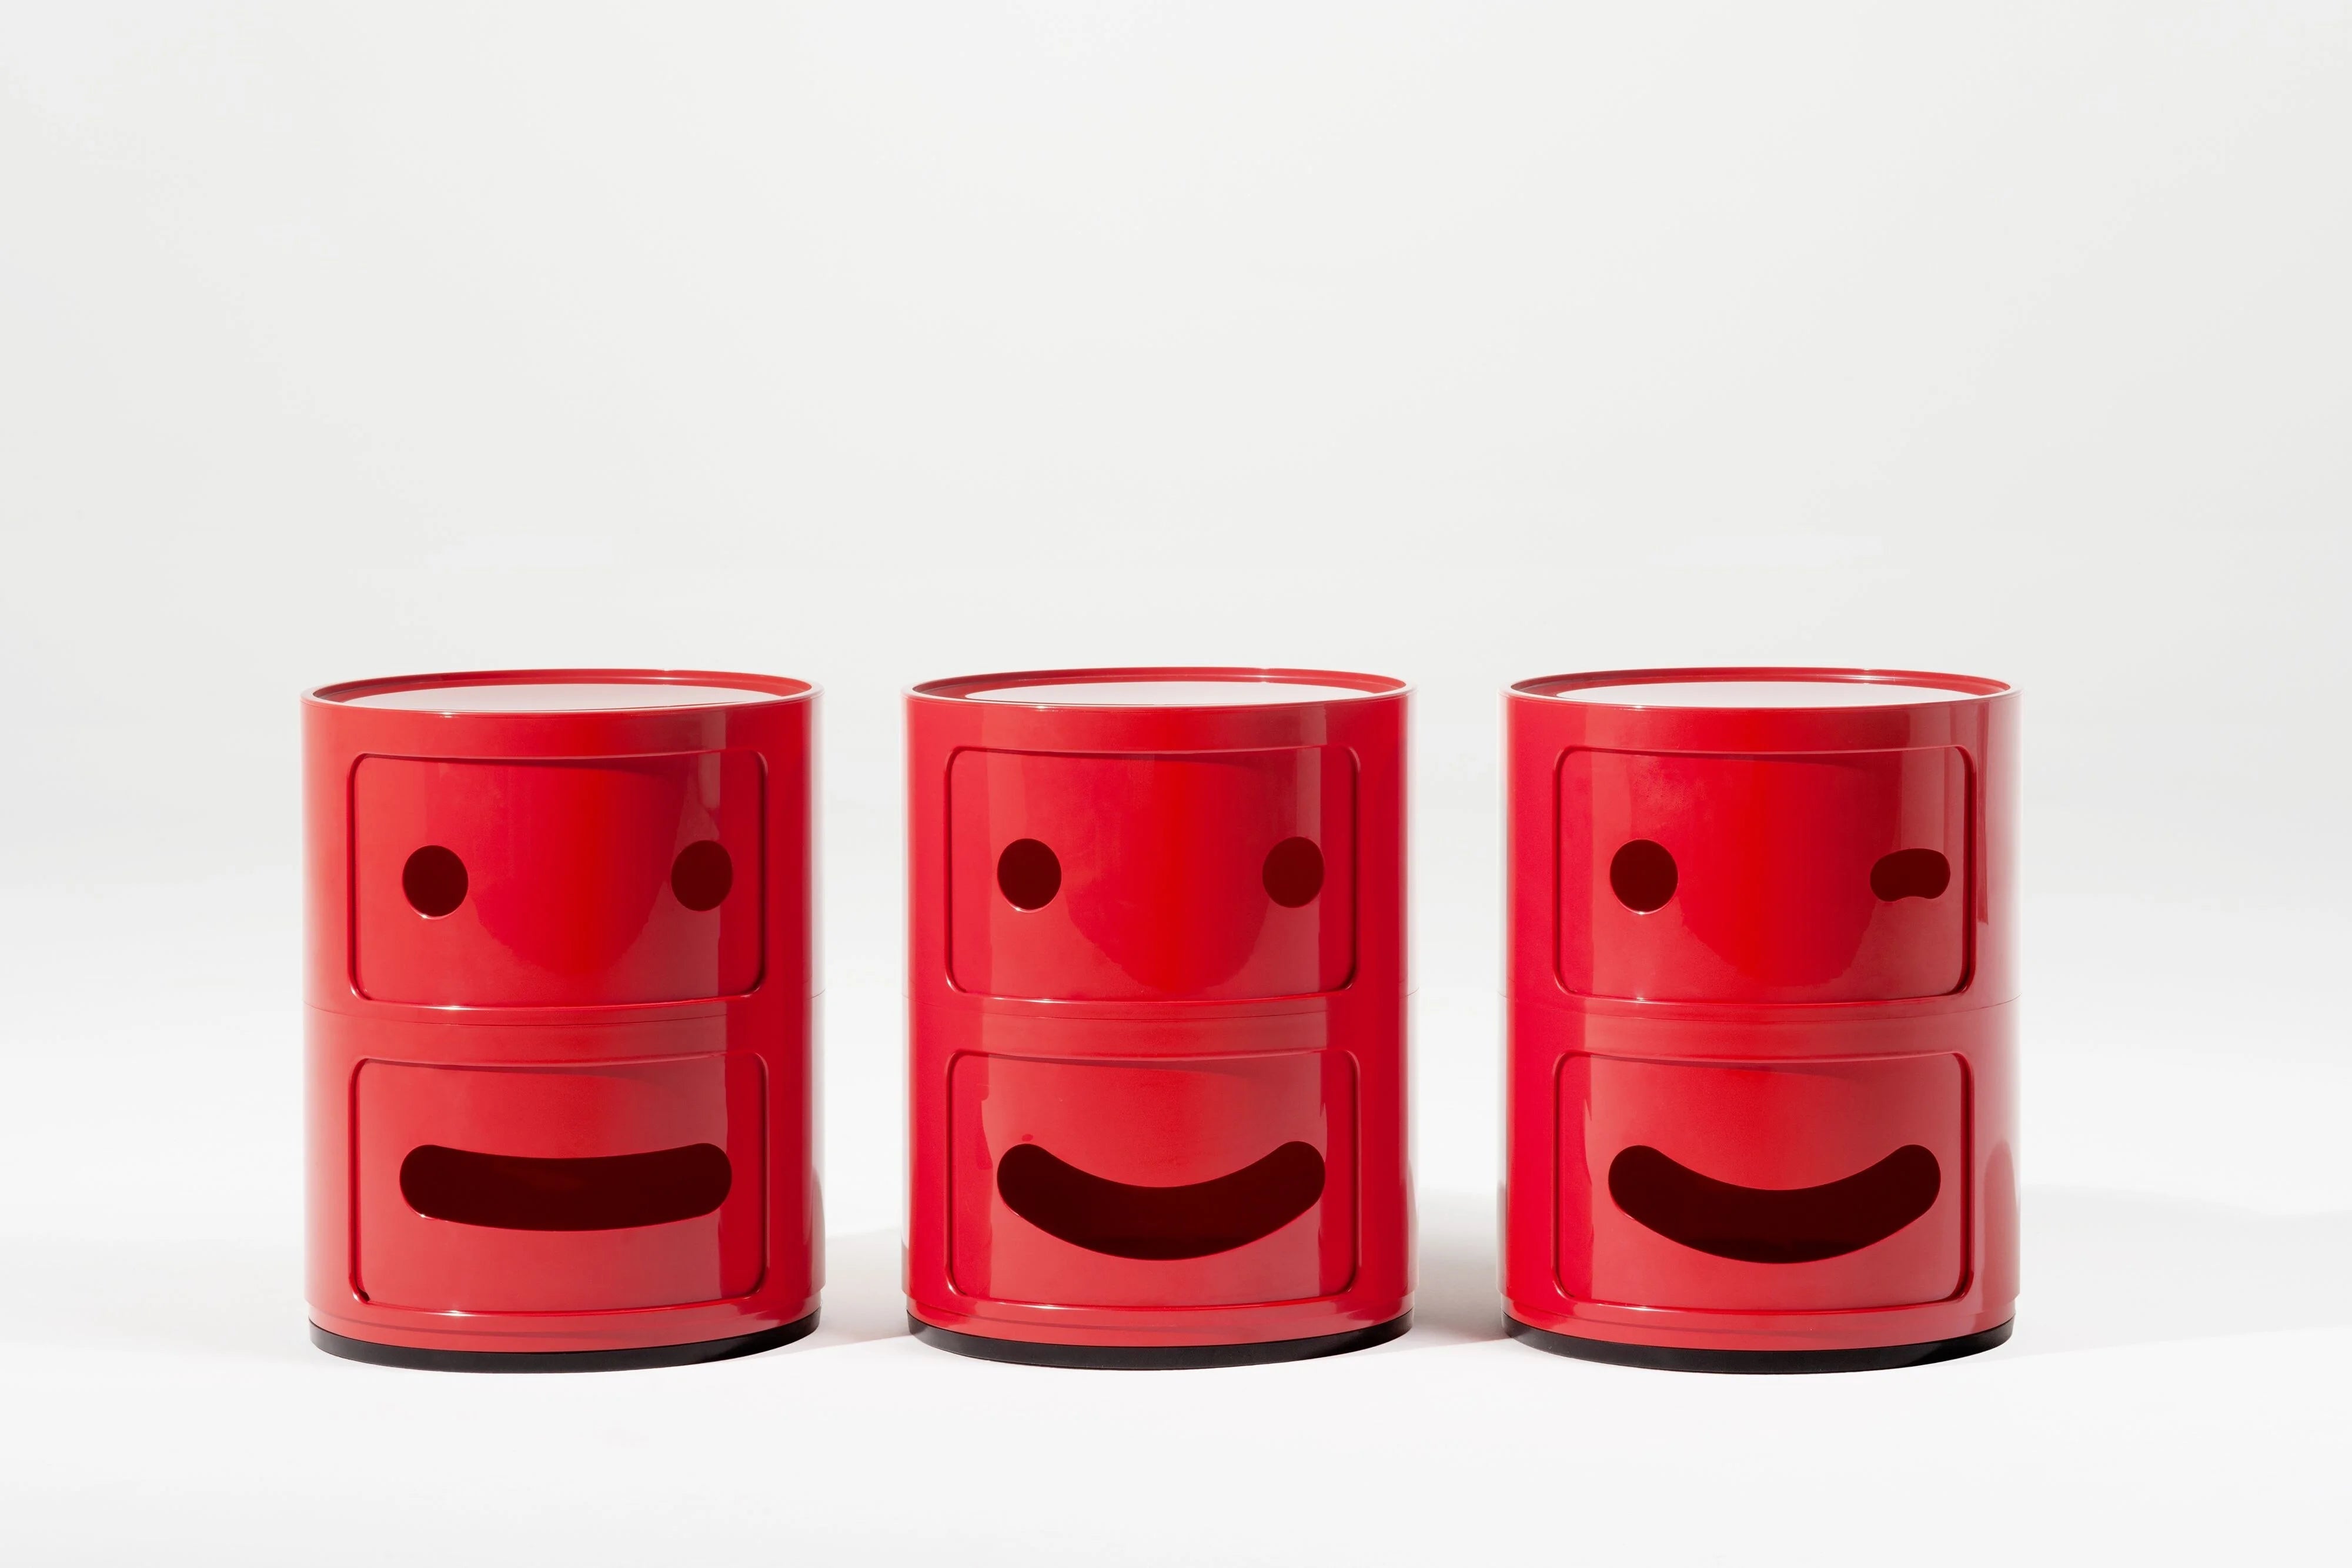 Kartell Componibili Smile Container 2 Level, 1